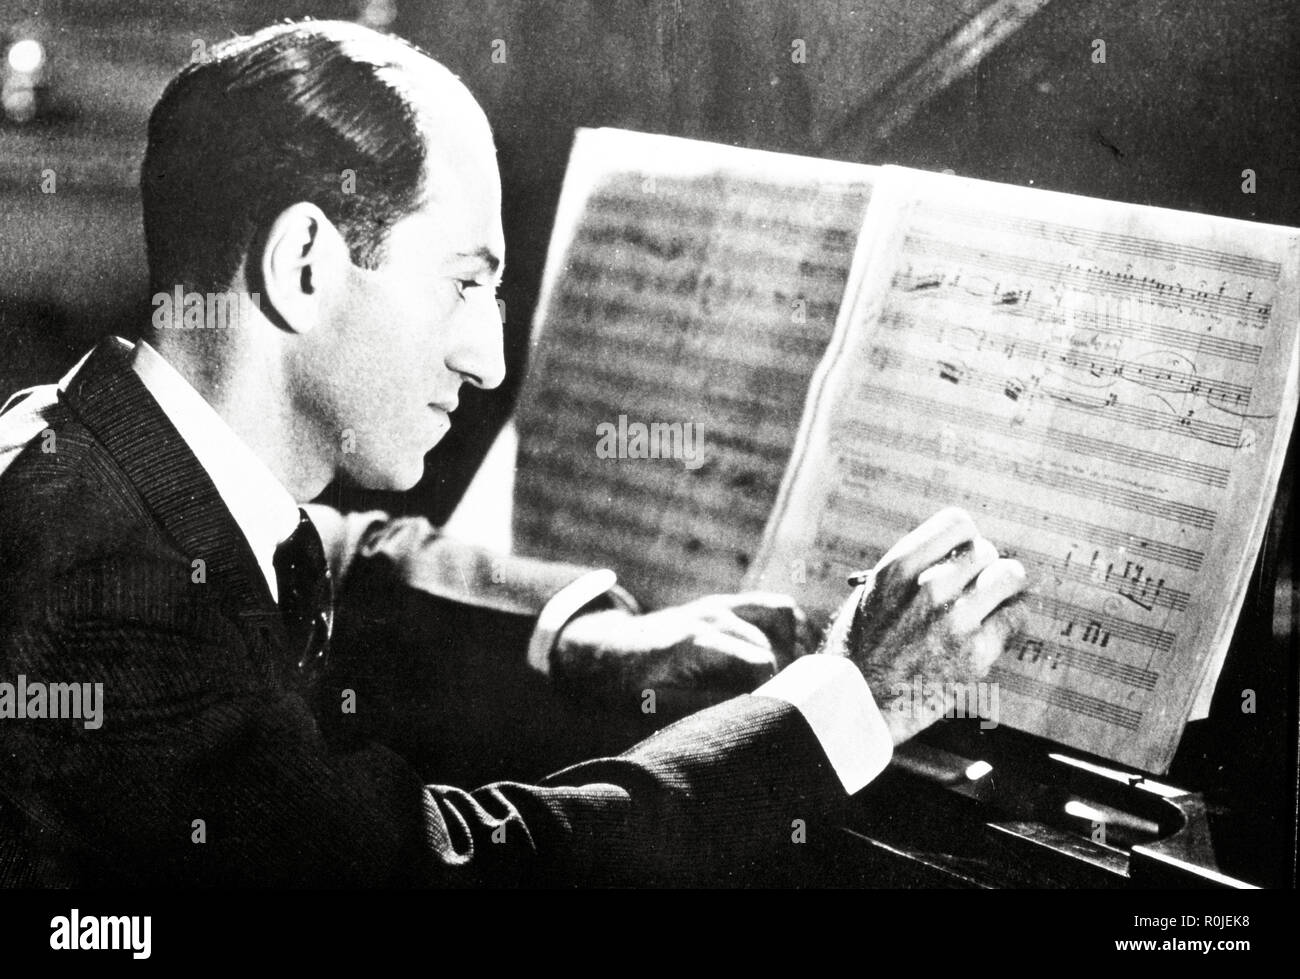 George Geshwin composing at the piano, 1936. Stock Photo